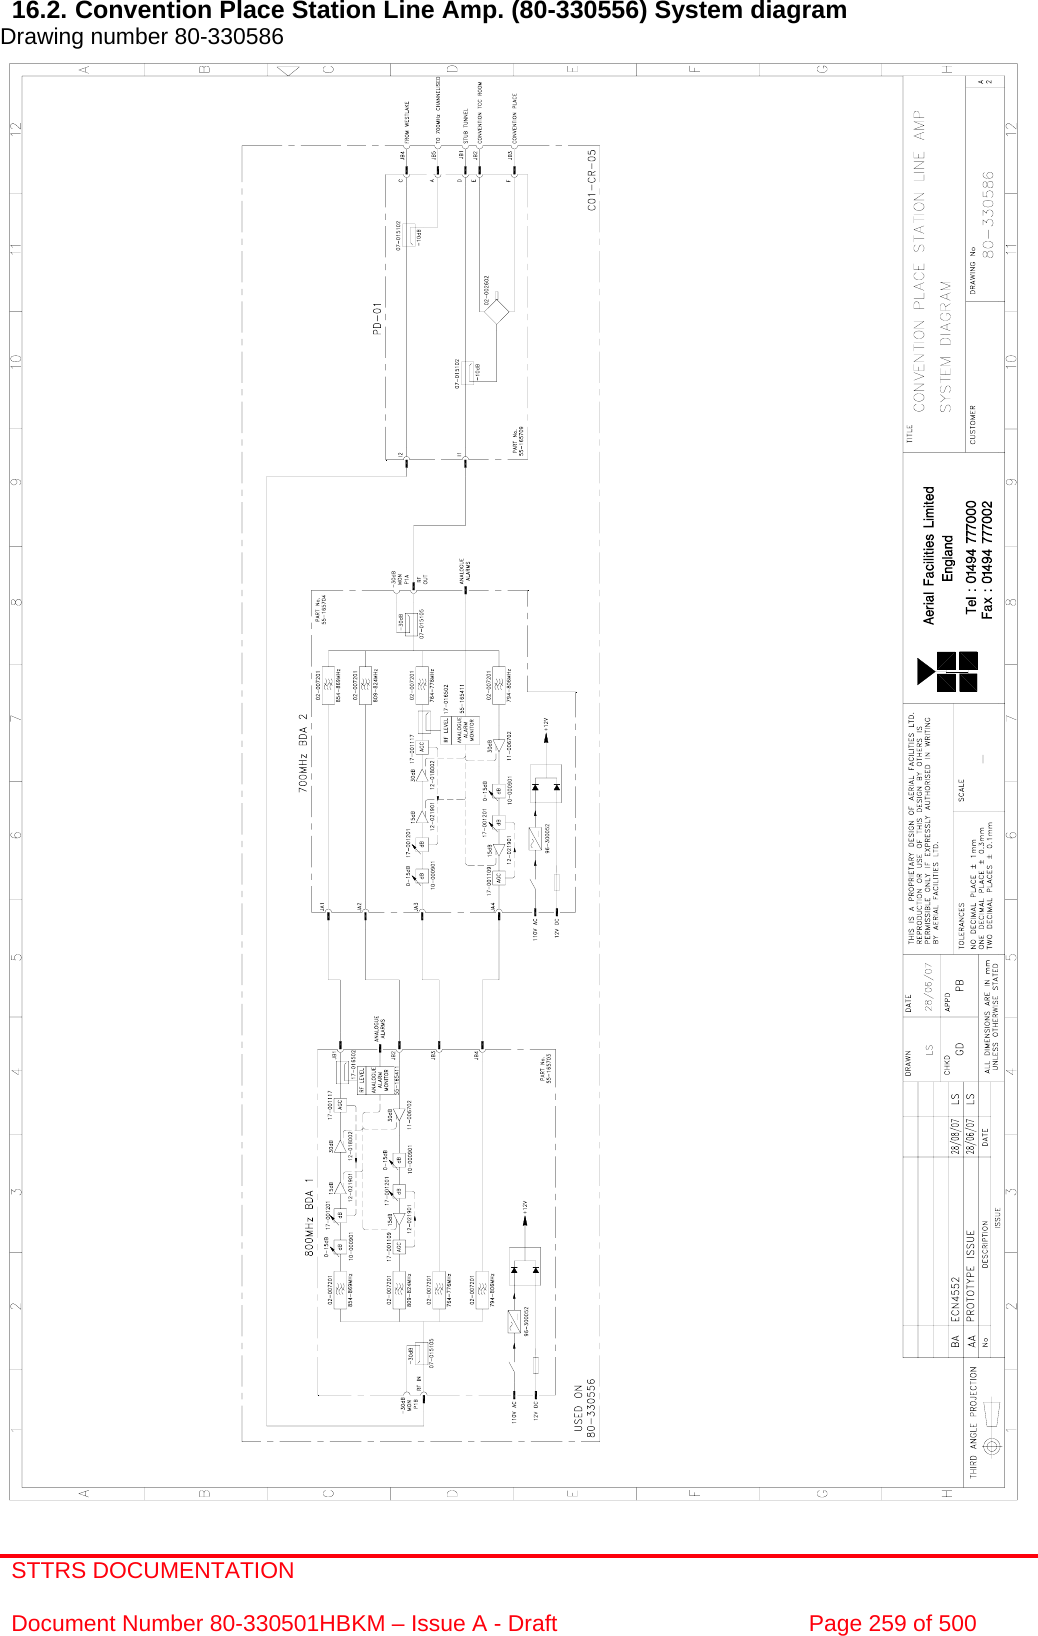 STTRS DOCUMENTATION  Document Number 80-330501HBKM – Issue A - Draft  Page 259 of 500   16.2. Convention Place Station Line Amp. (80-330556) System diagram Drawing number 80-330586                                                   